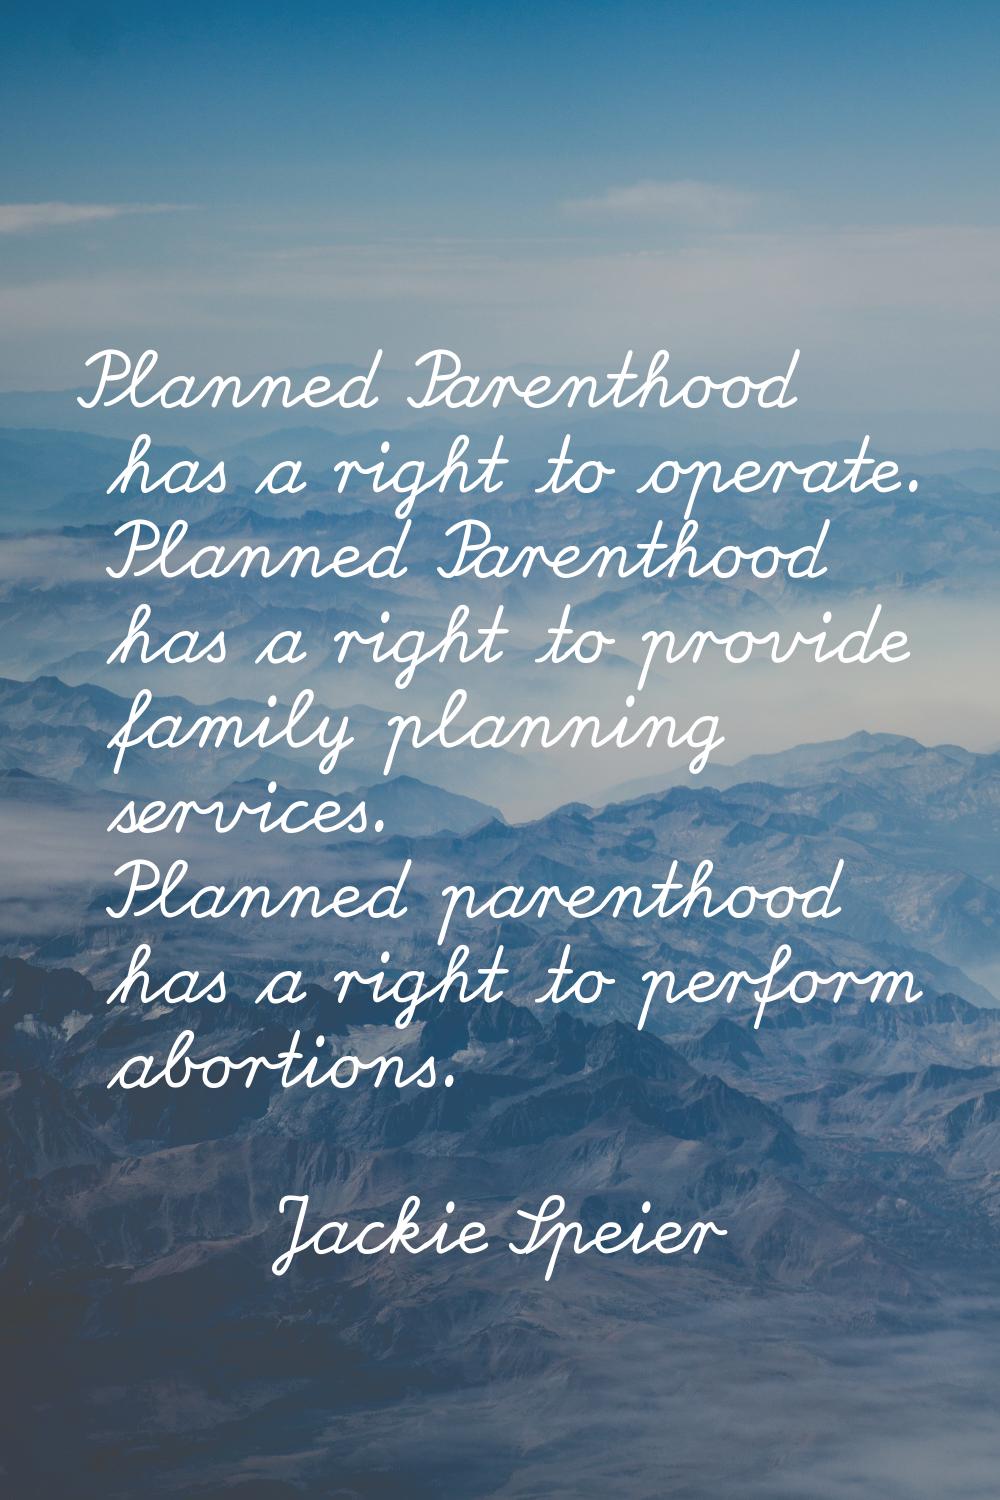 Planned Parenthood has a right to operate. Planned Parenthood has a right to provide family plannin